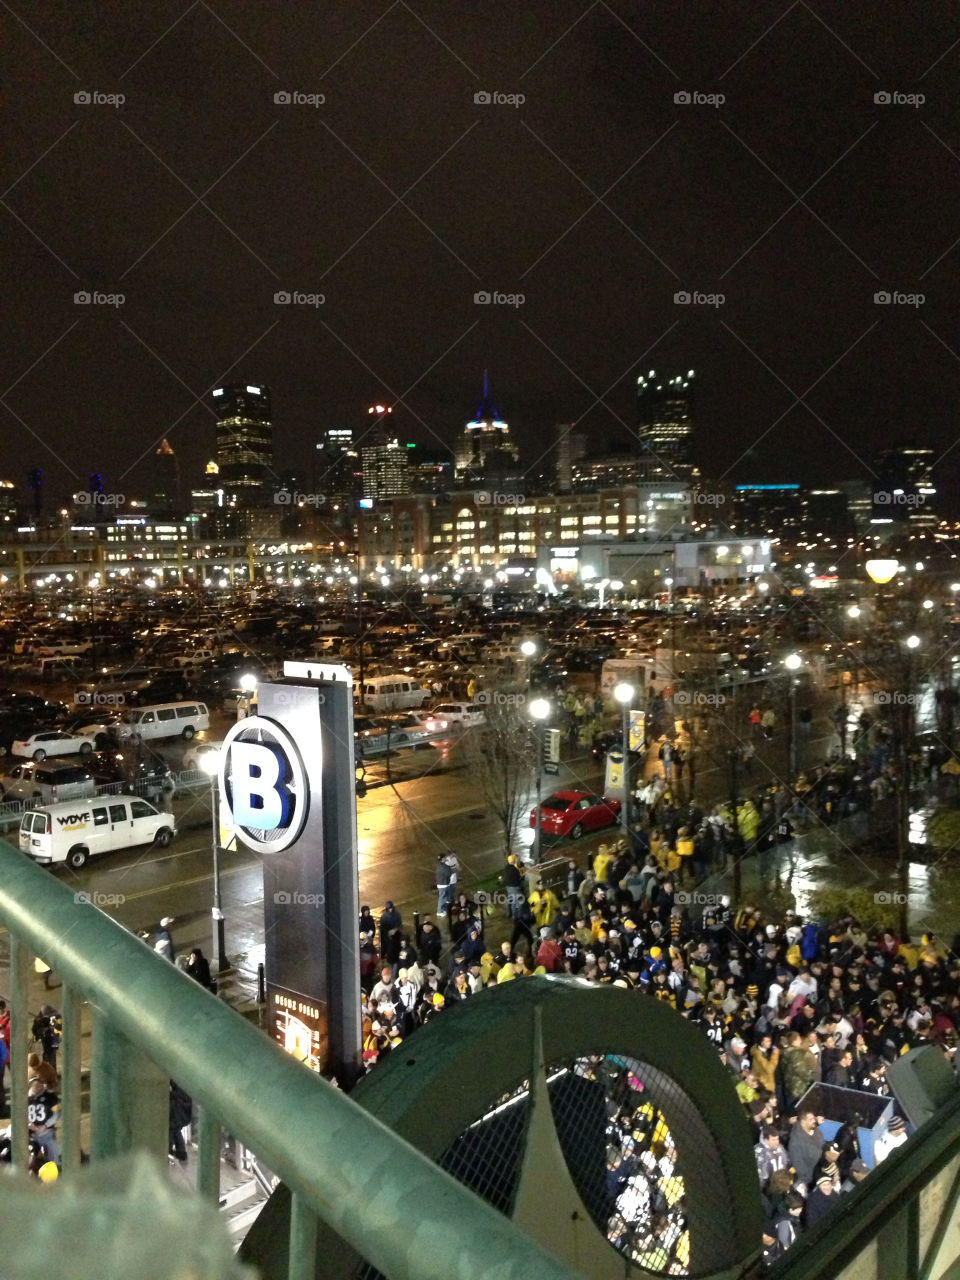 pittsburgh steelers monday football chiefs black gold downtown pittsburgh pennsylvania by chadhudecki